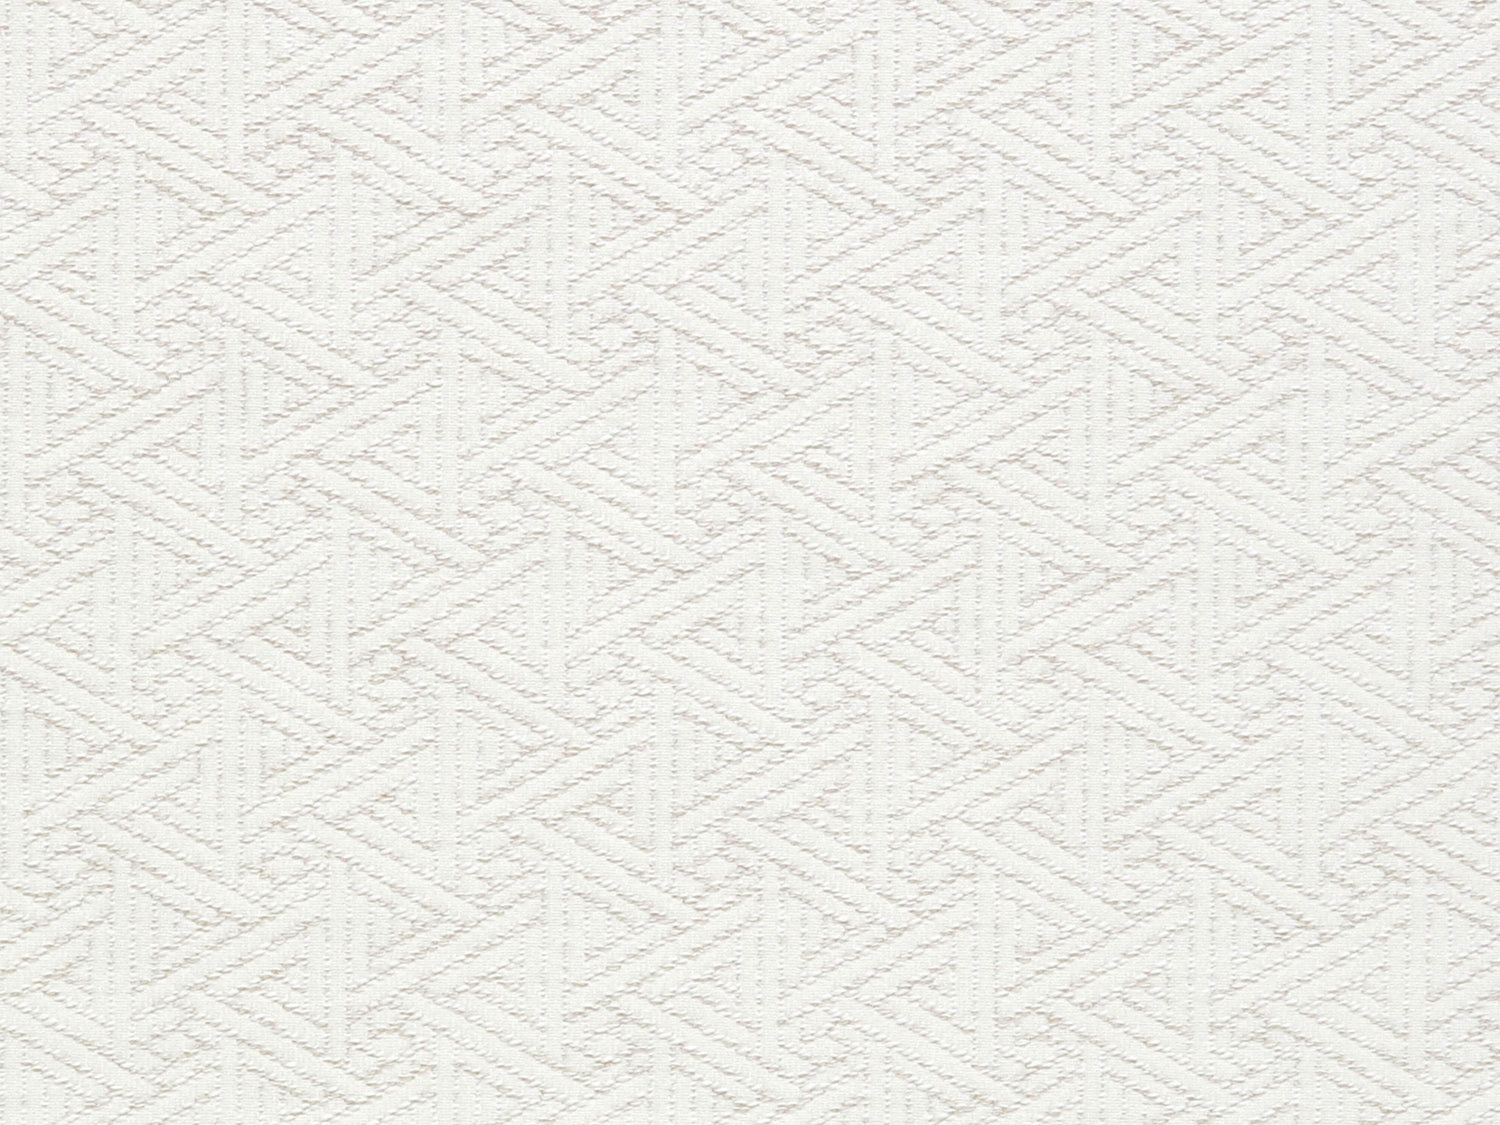 Silverton Mountain fabric in snow cap color - pattern number LU 00018081 - by Scalamandre in the Old World Weavers collection